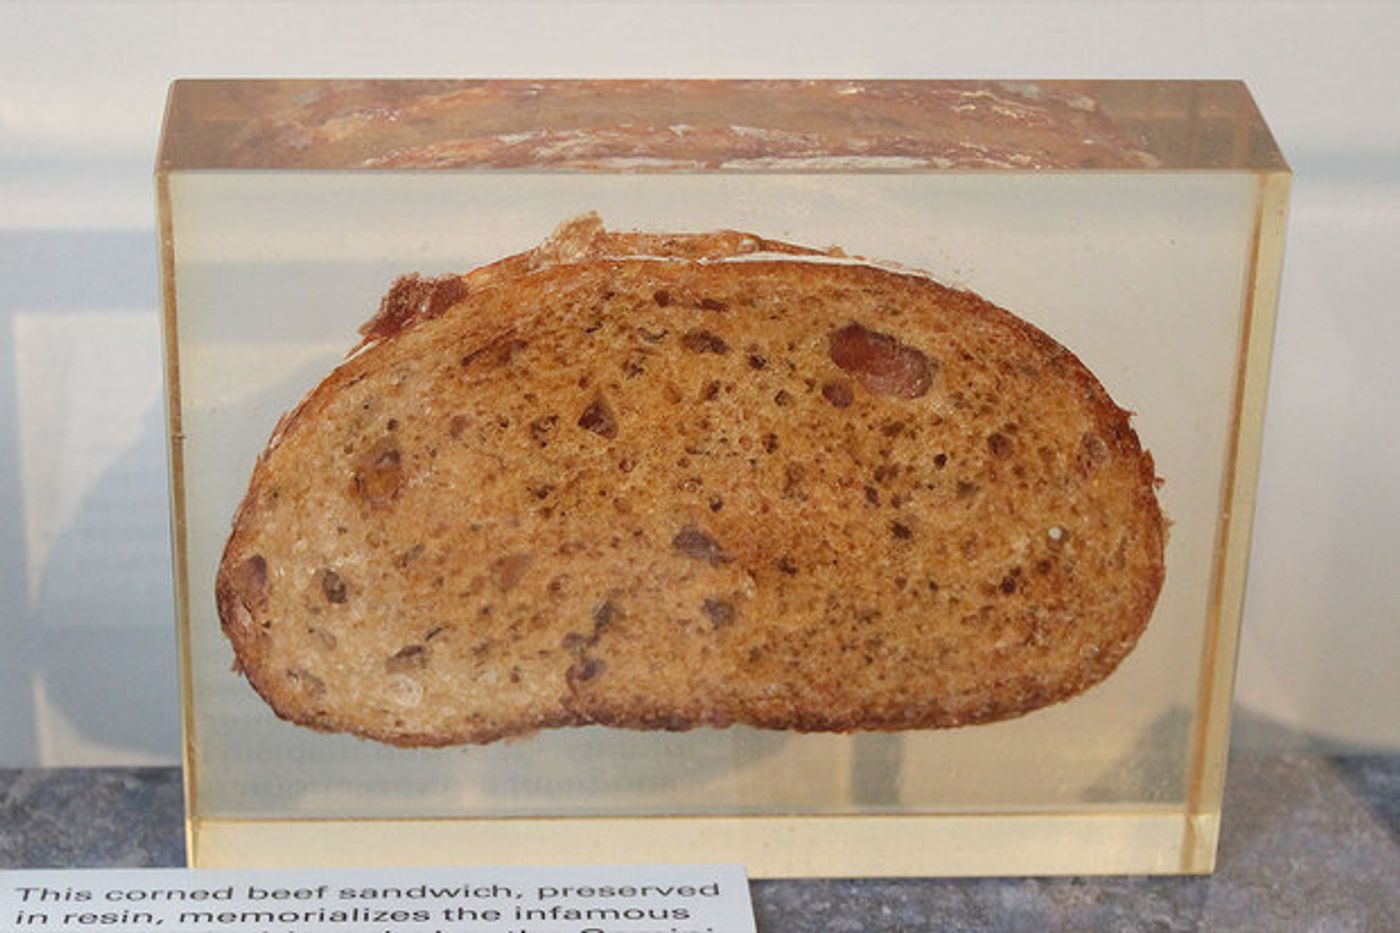 John Young and Gus Grissom shared this corned beef sandwich in space 50 years ago.